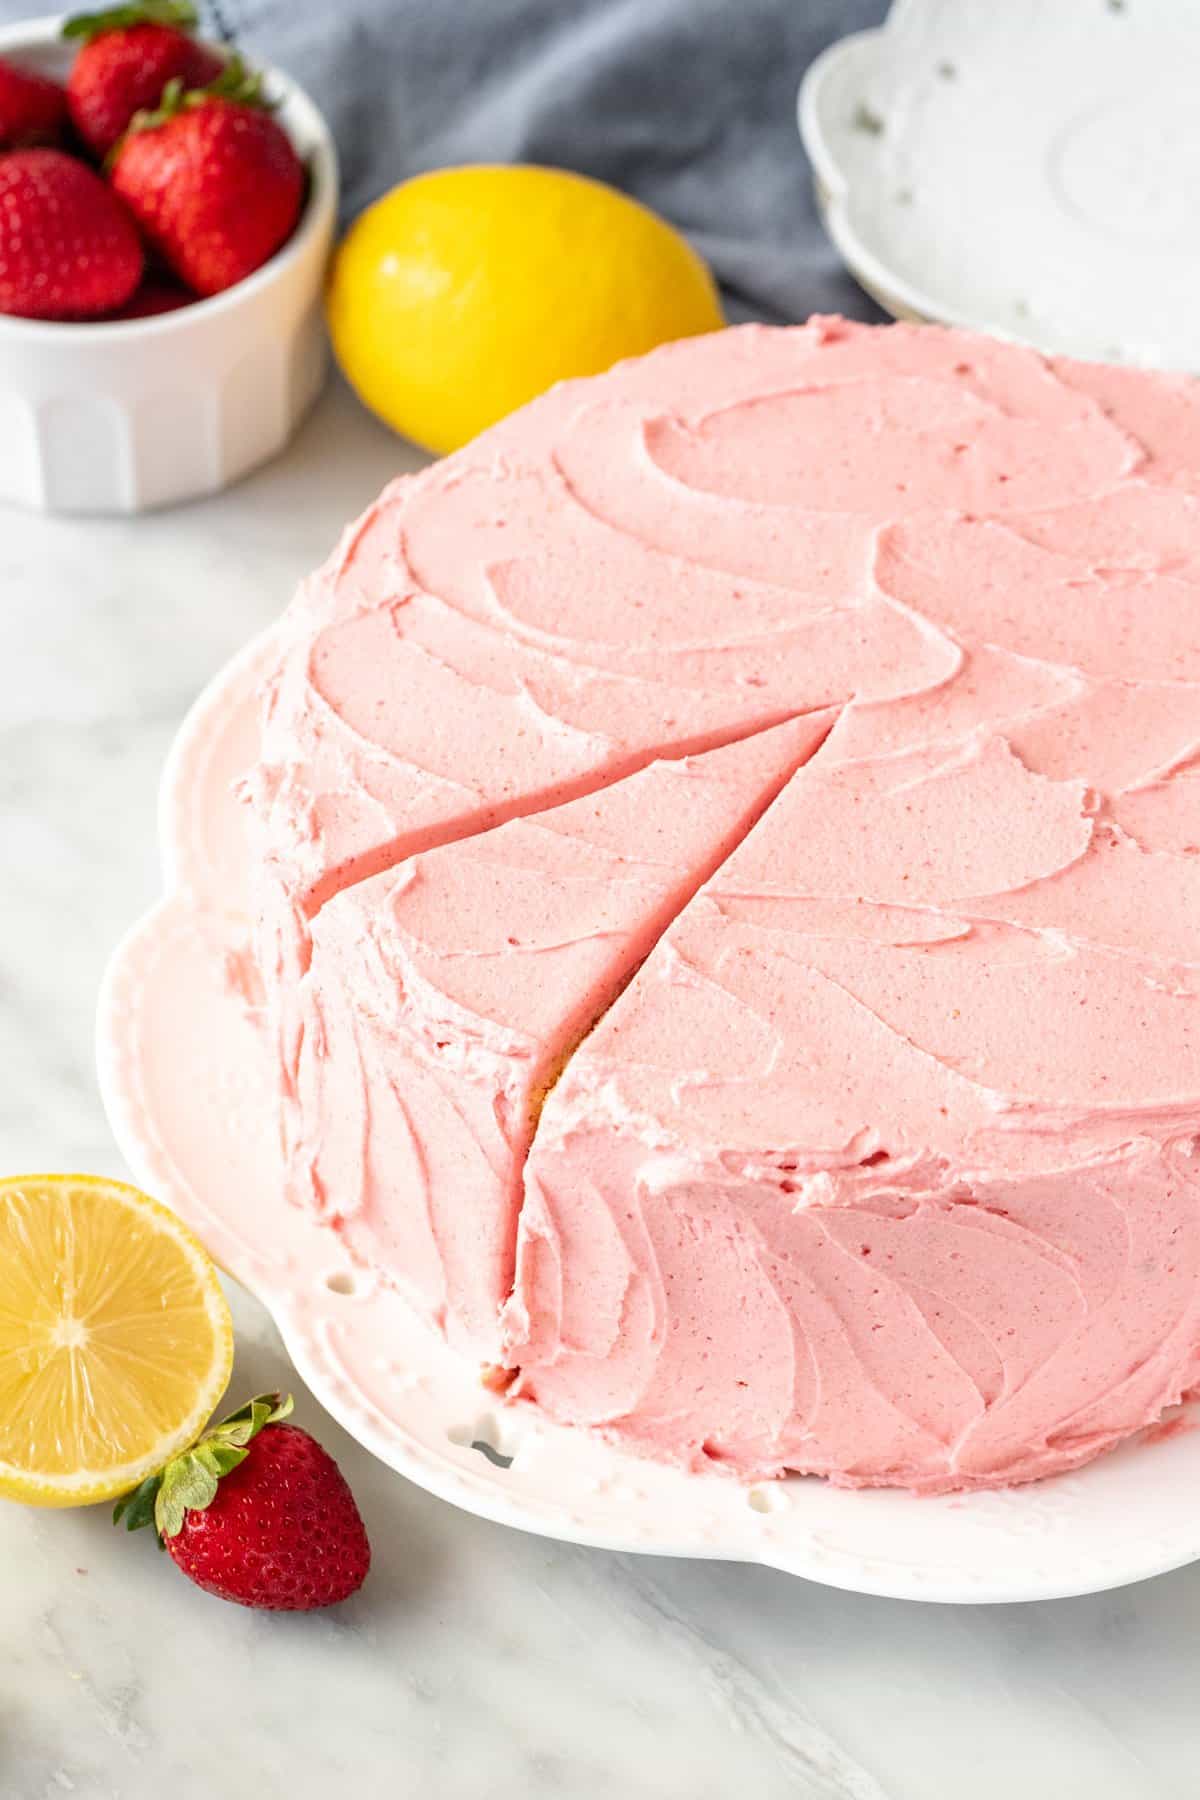 Round layer cake with strawberry frosting